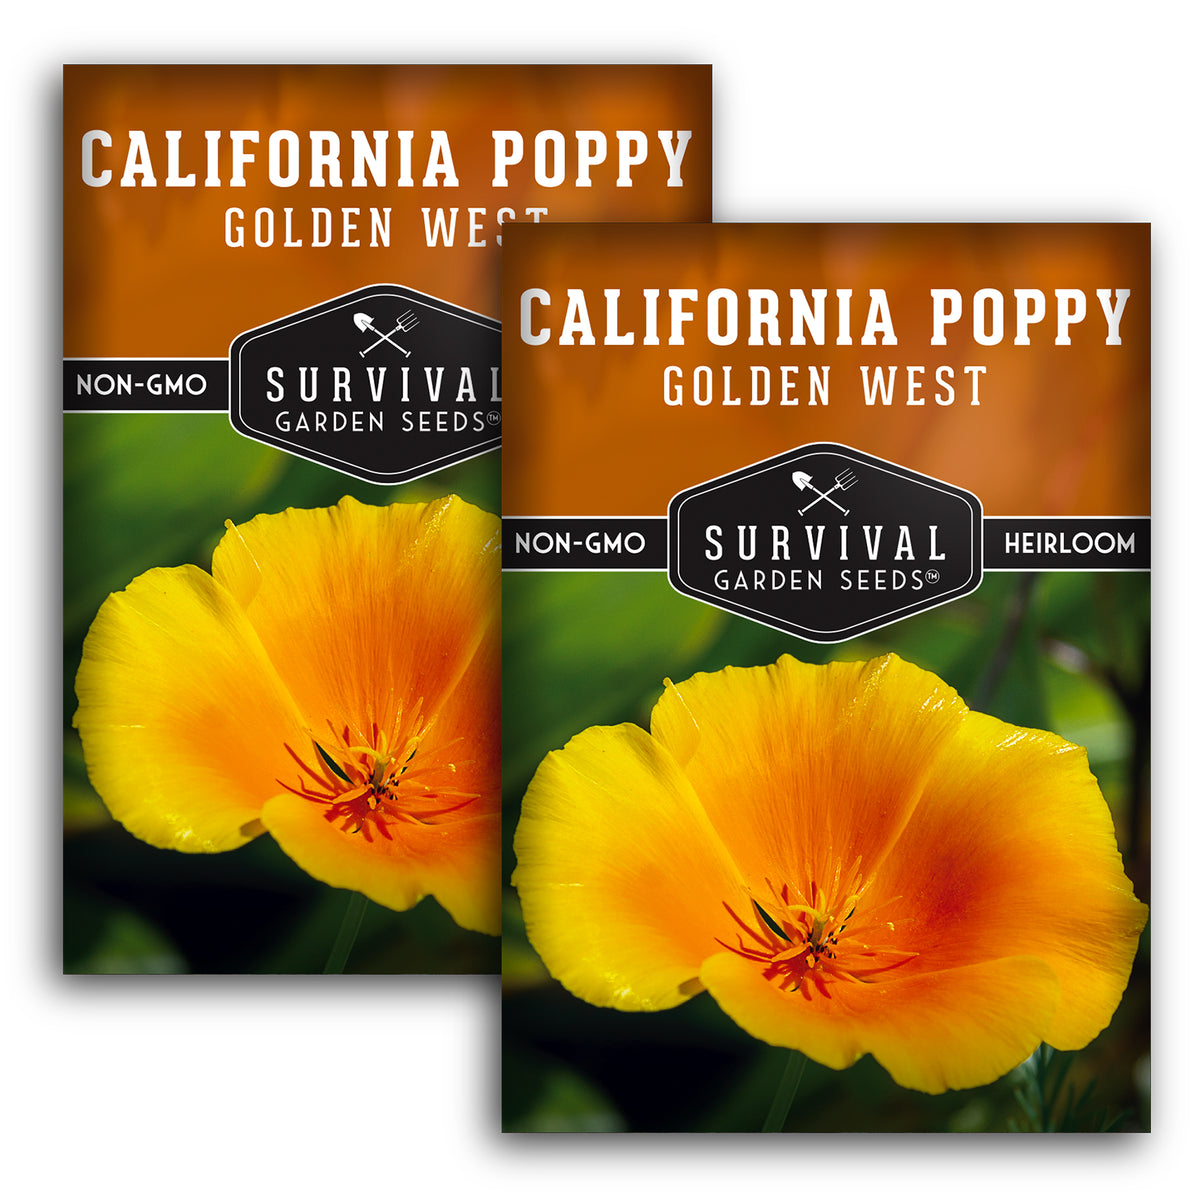 2 Packets of Golden West Poppy Seeds